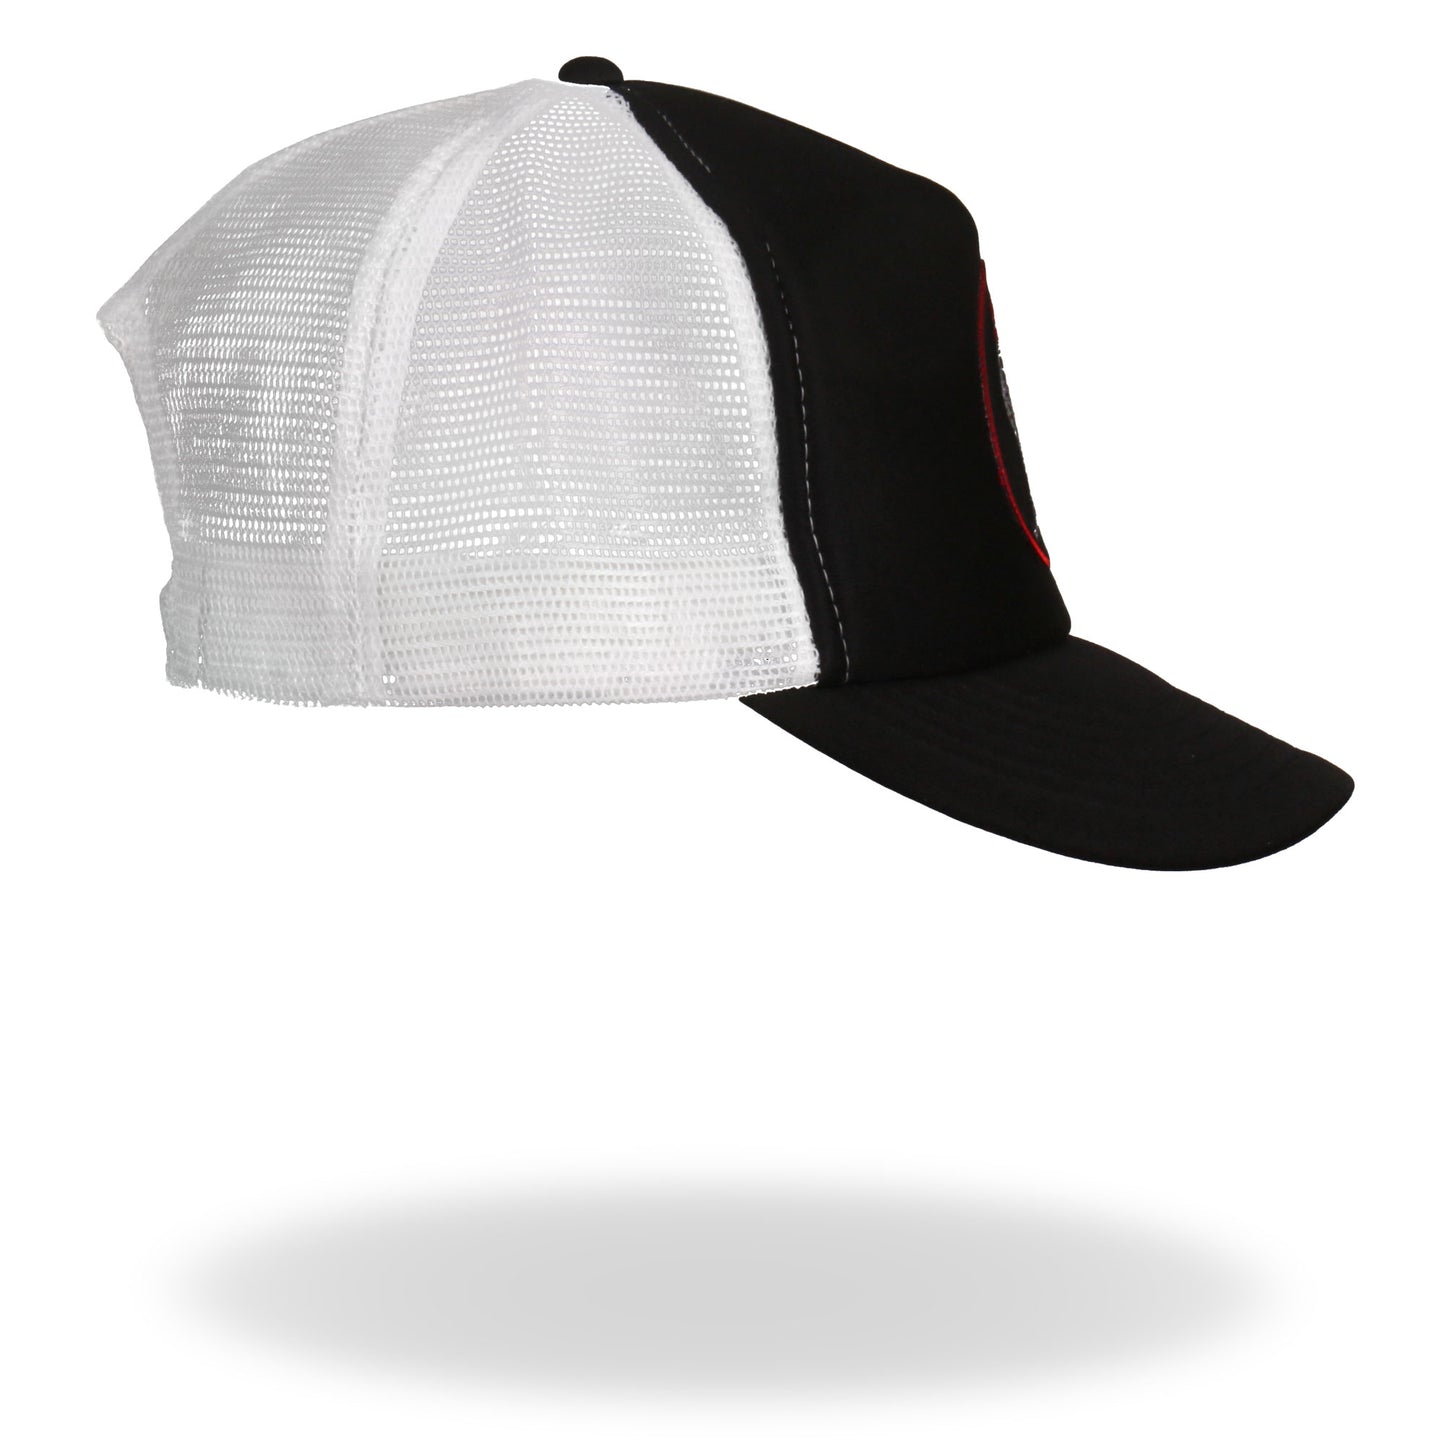 Hot Leathers GSH1012 Rooster Black and White Trucker Hat